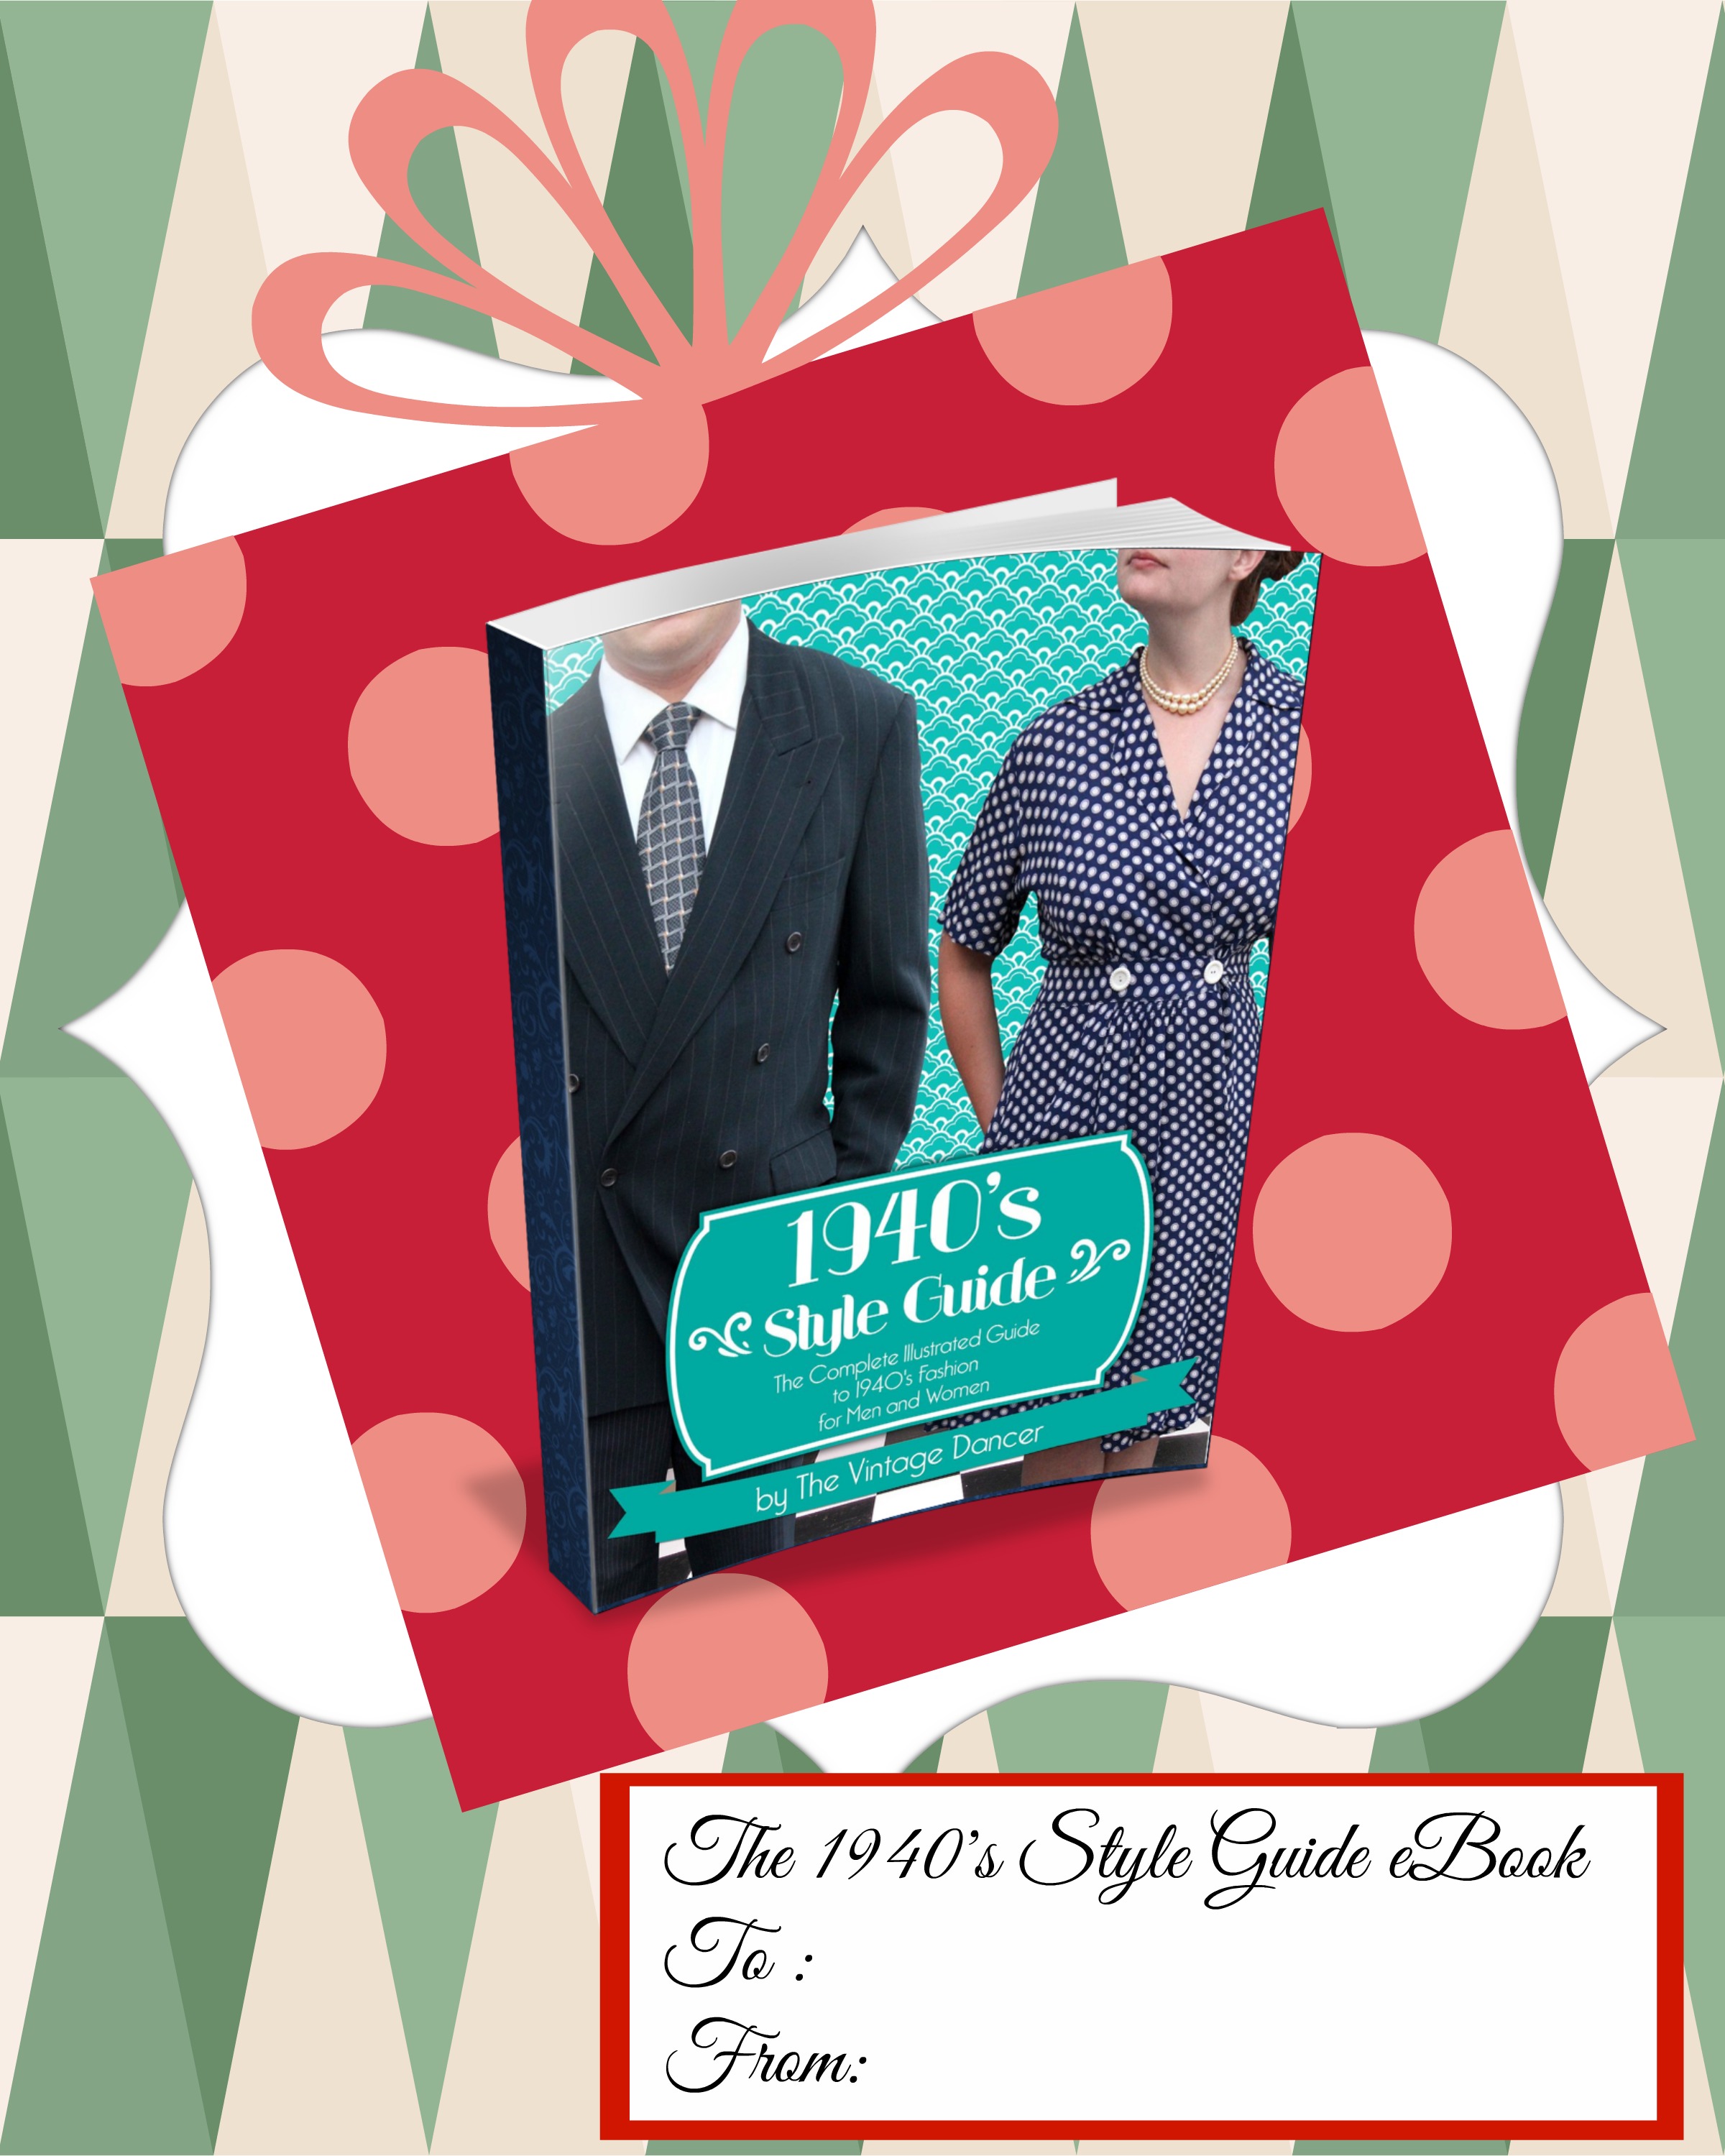 Last Minute Gift? 1940s Style Guide 40% off